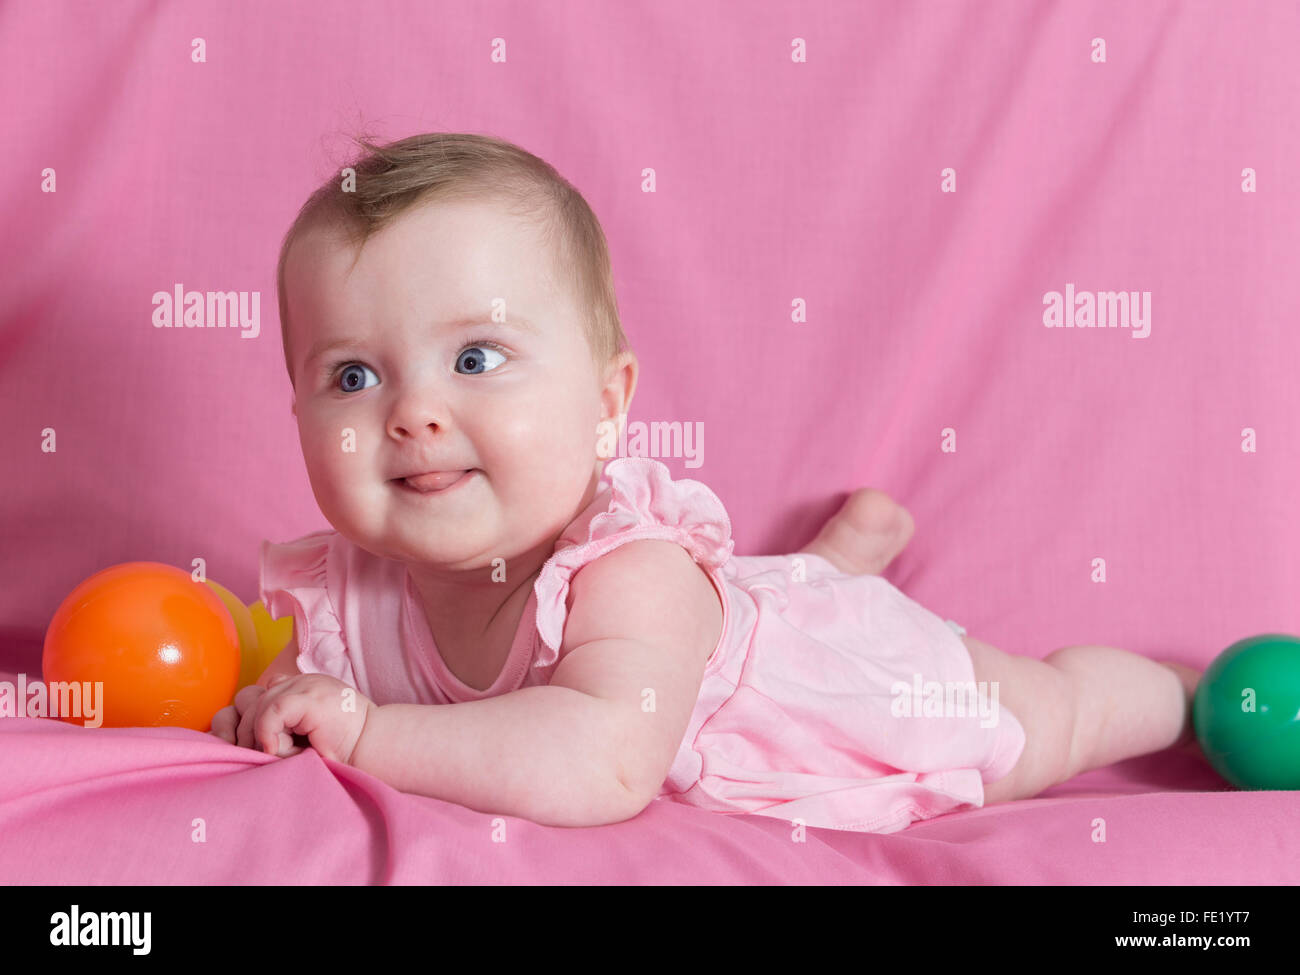 Adorable happy baby girl on pink background Stock Photo